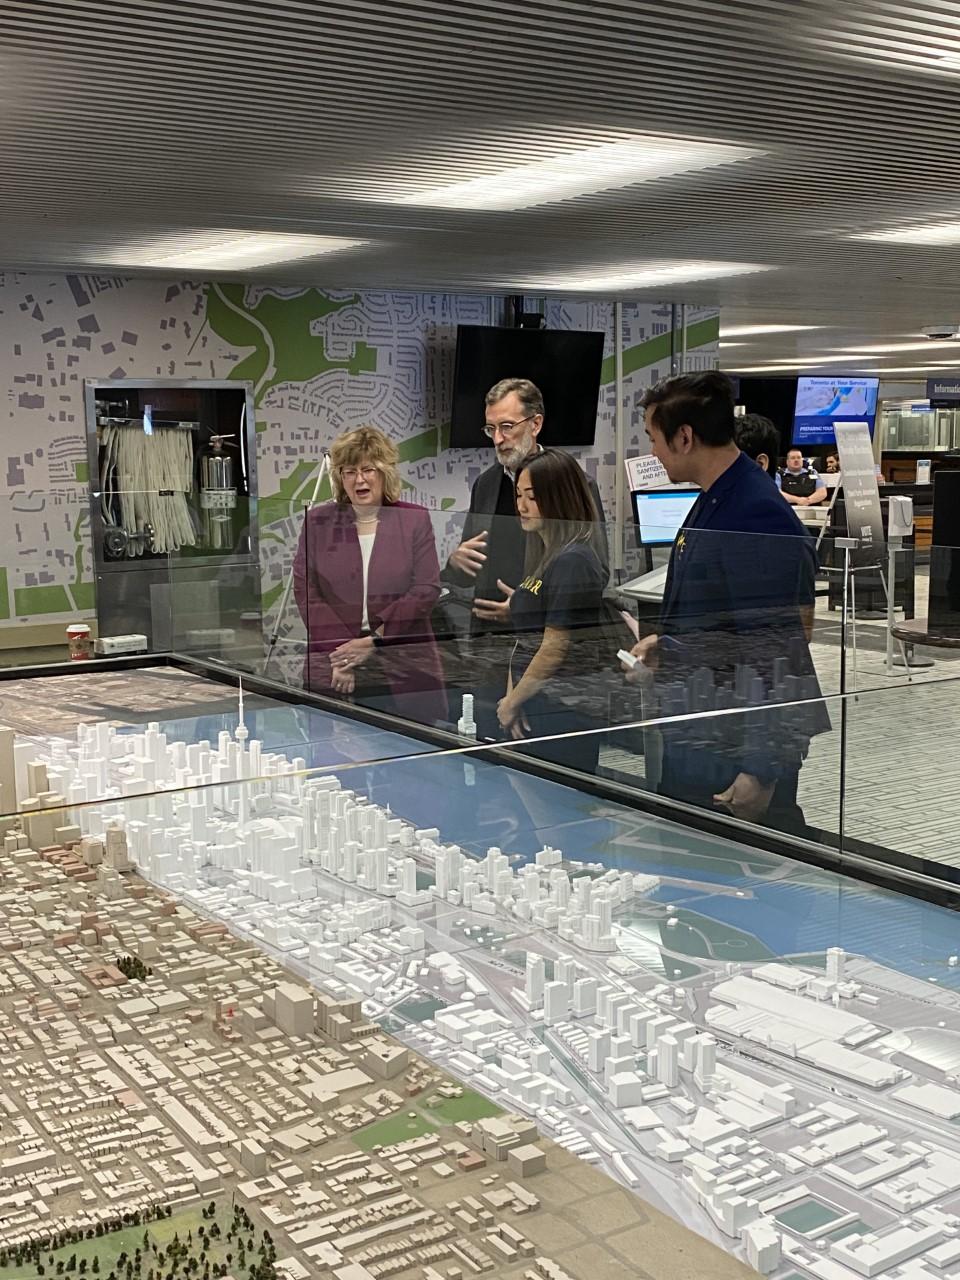 Several people, including three Humber College students, look at a model of the City of Toronto on display at City Hall.